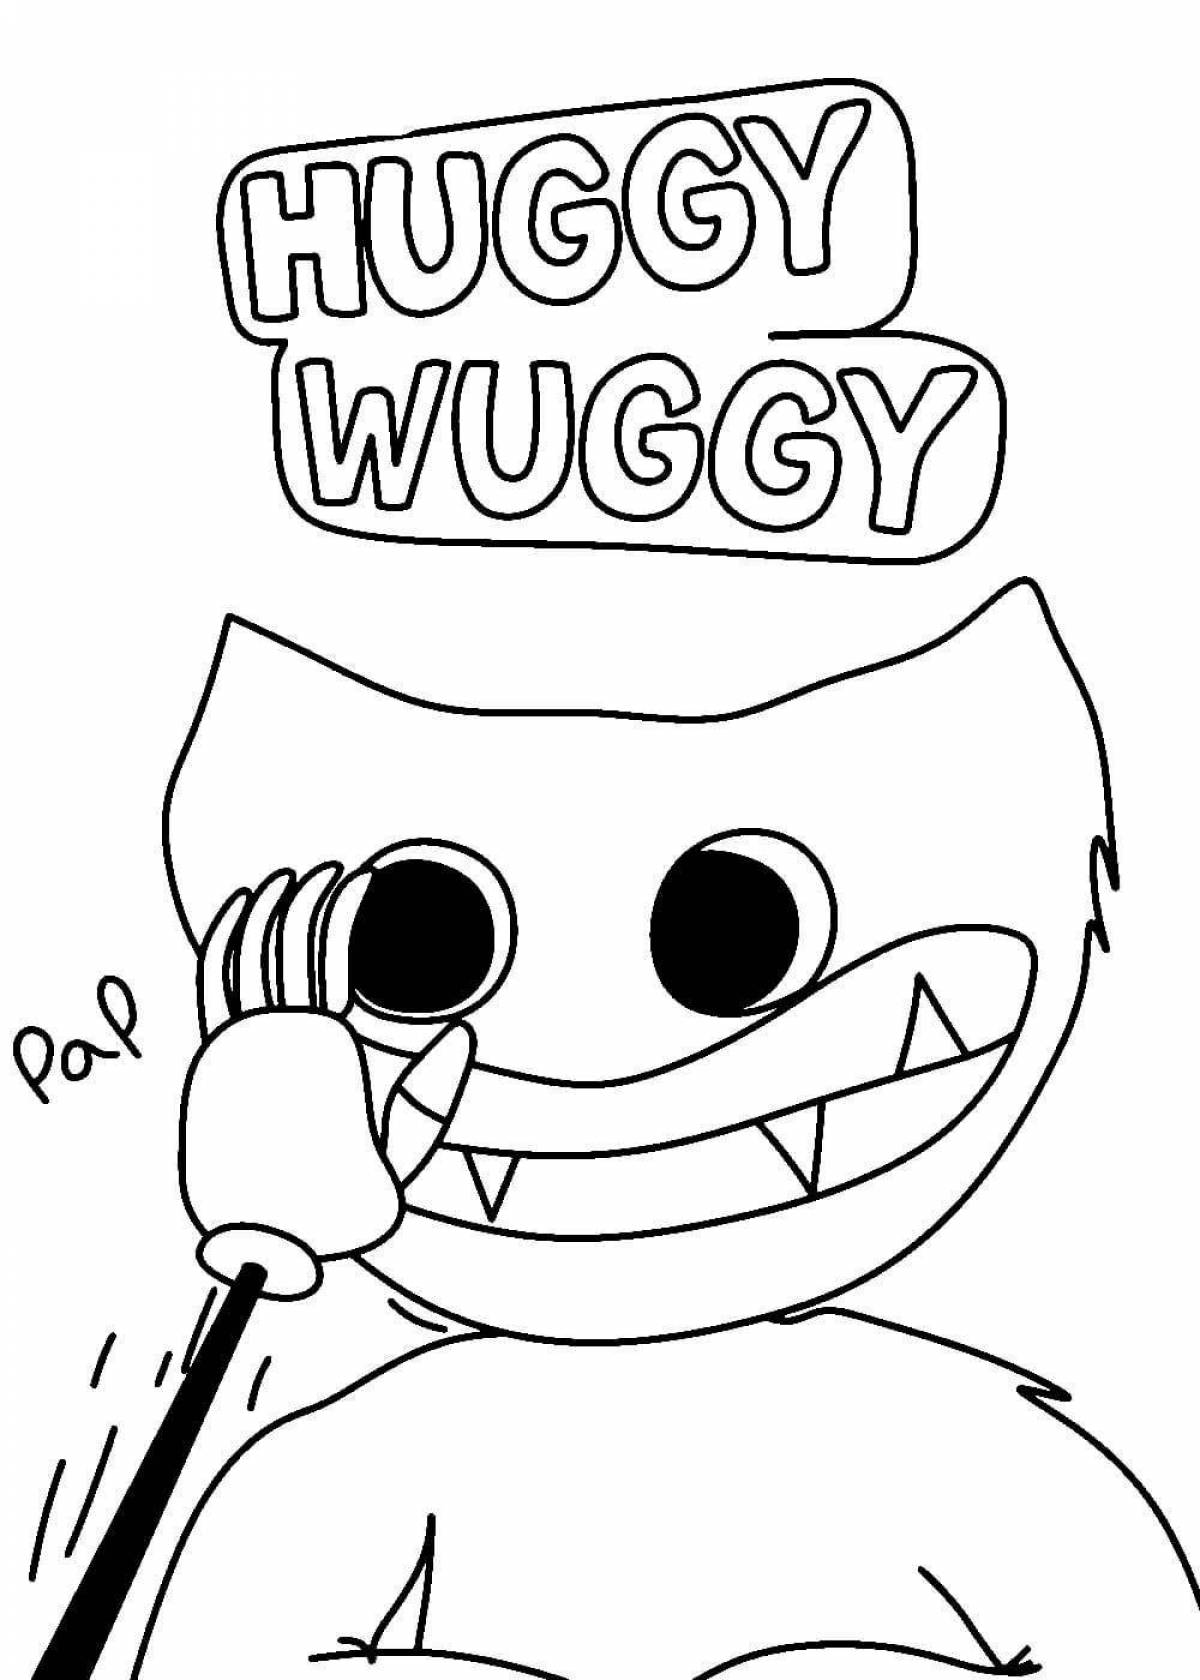 Colorful huggy waggie coloring page